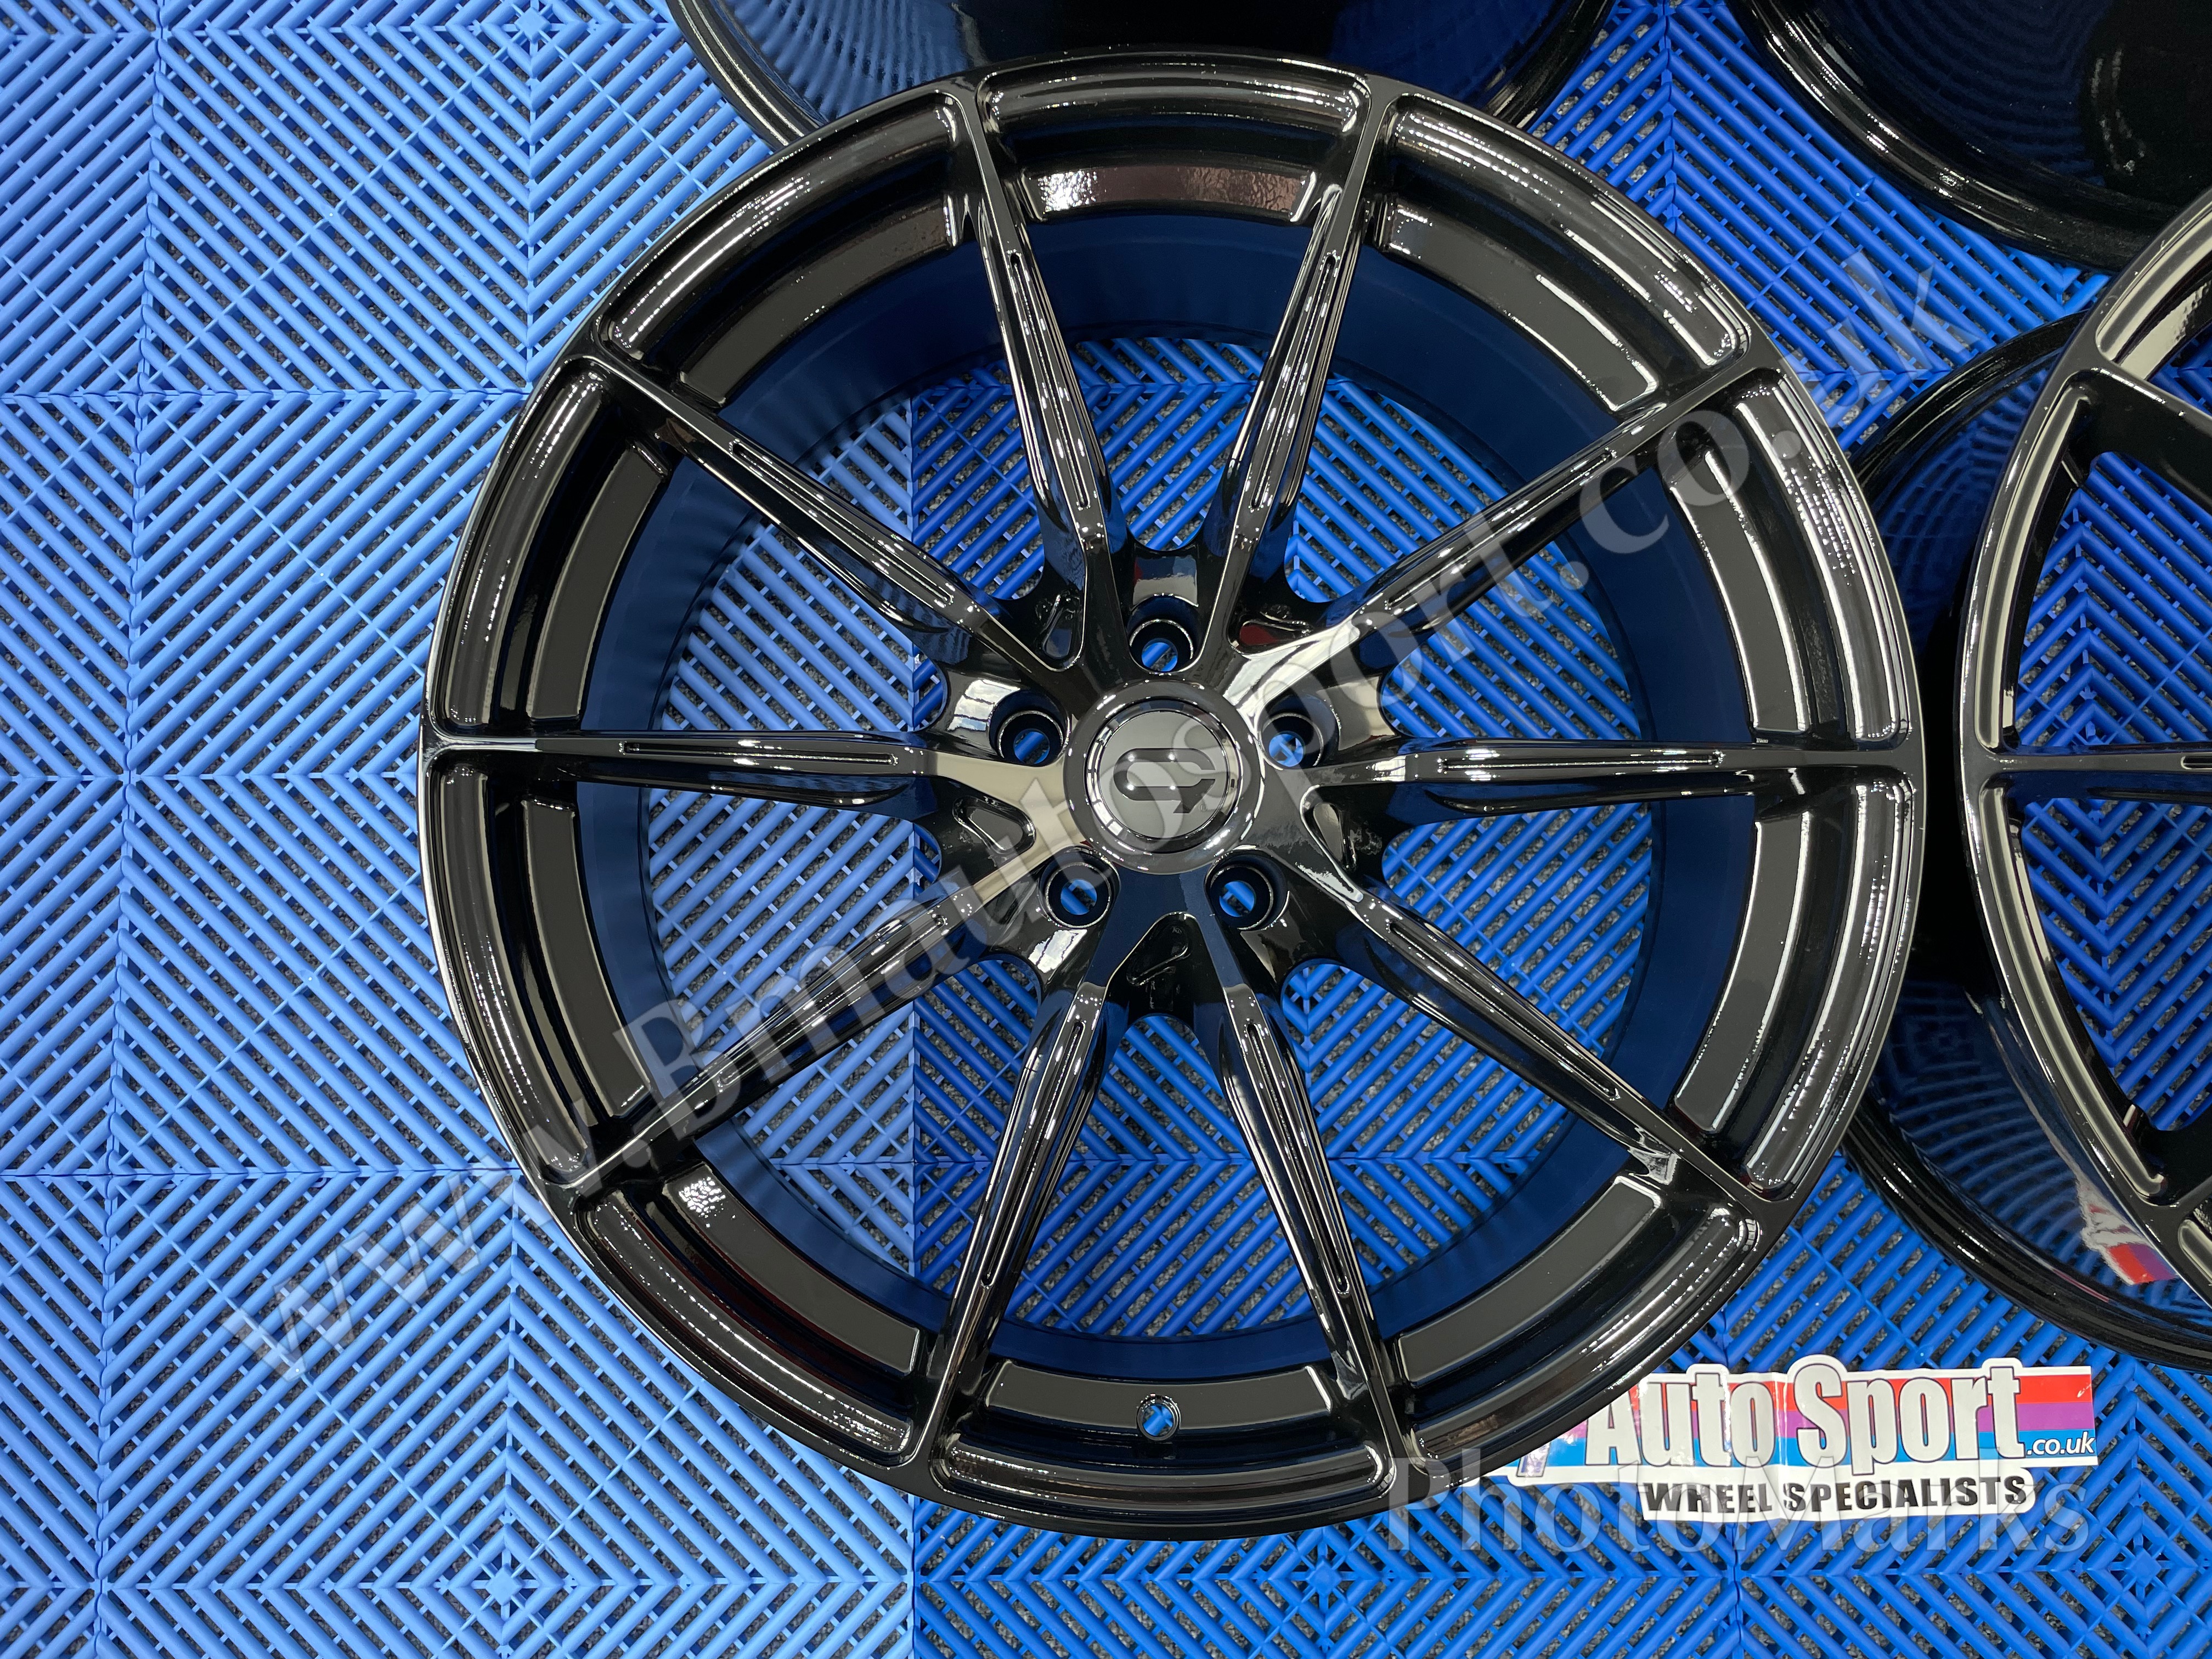 NEW 20" C9 CORTEZ ALLOY WHEELS IN GLOSS BLACK WITH WIDER REAR